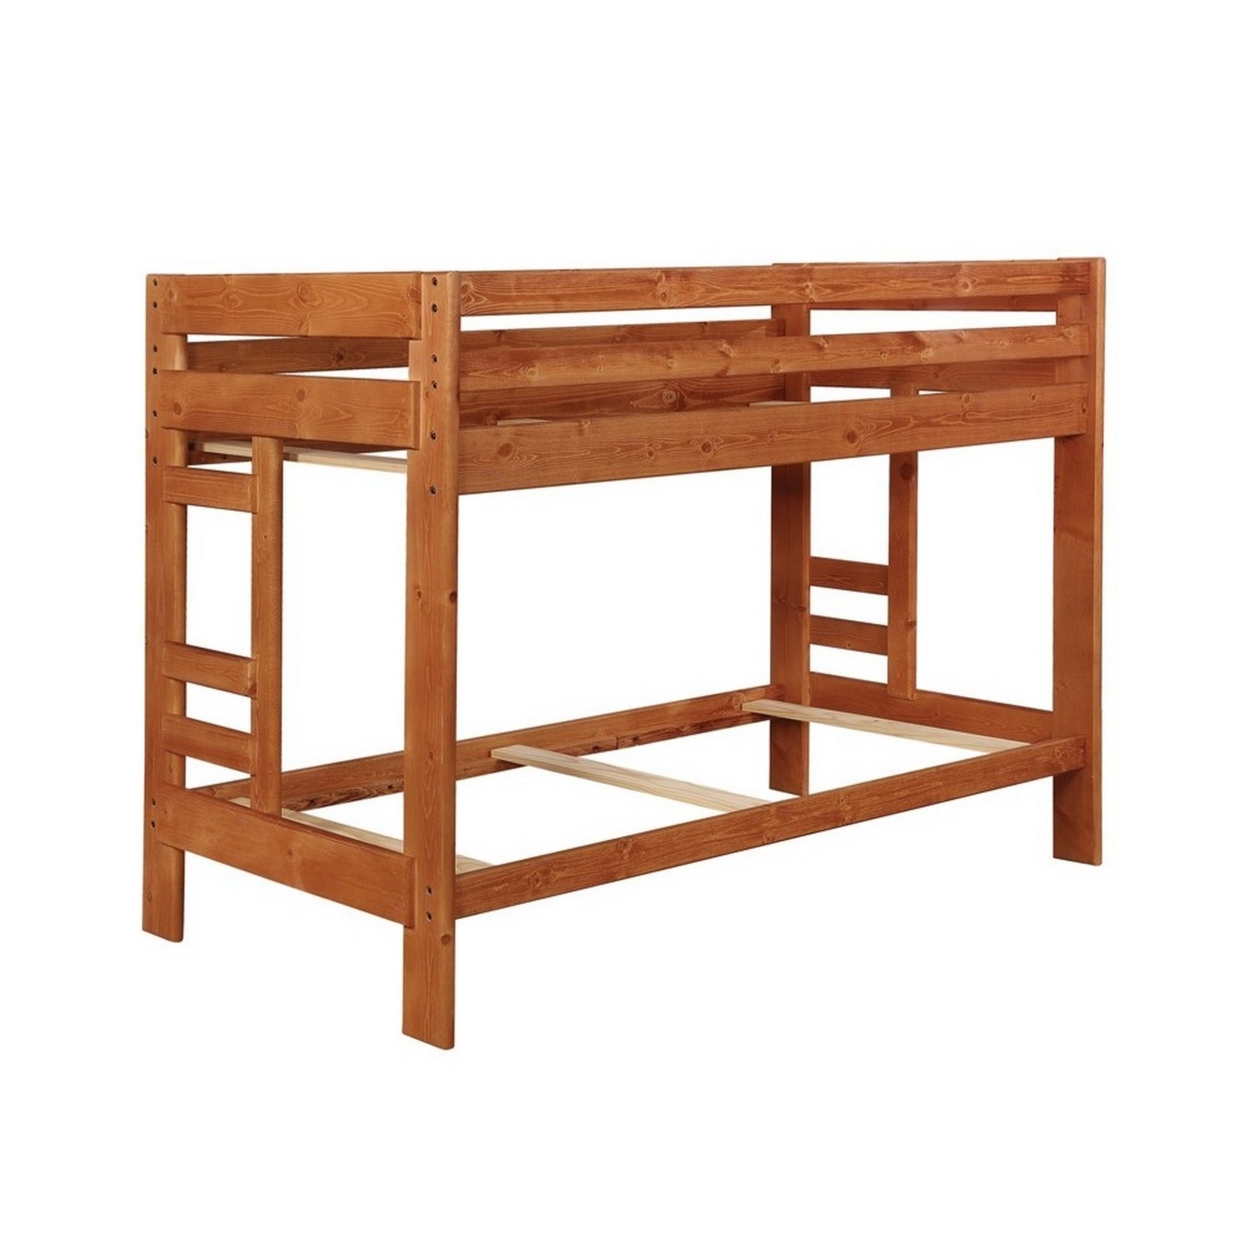 Transitional Style Twin Over Twin Bunk Bed With Built In Ladder, Brown- Saltoro Sherpi